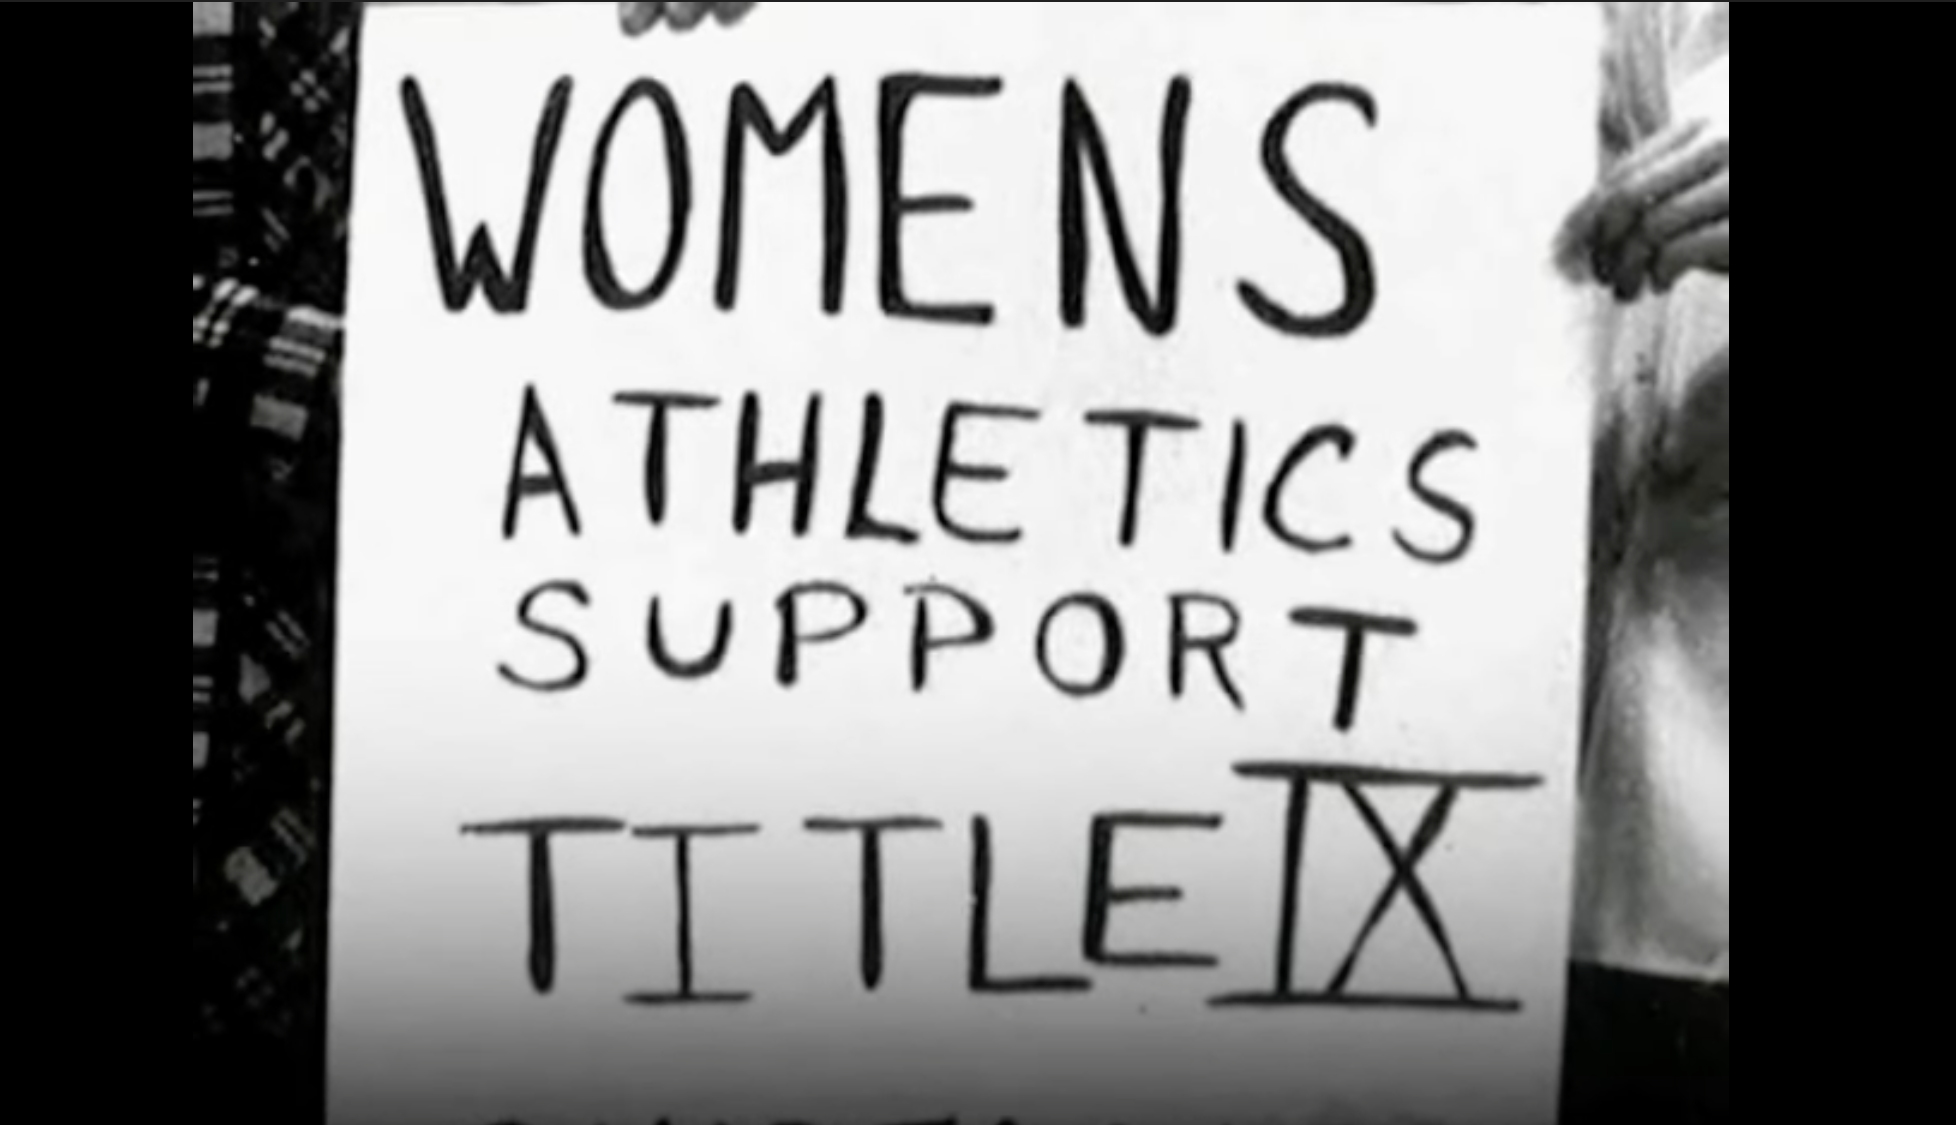 Too Strong For A Woman: Title IX